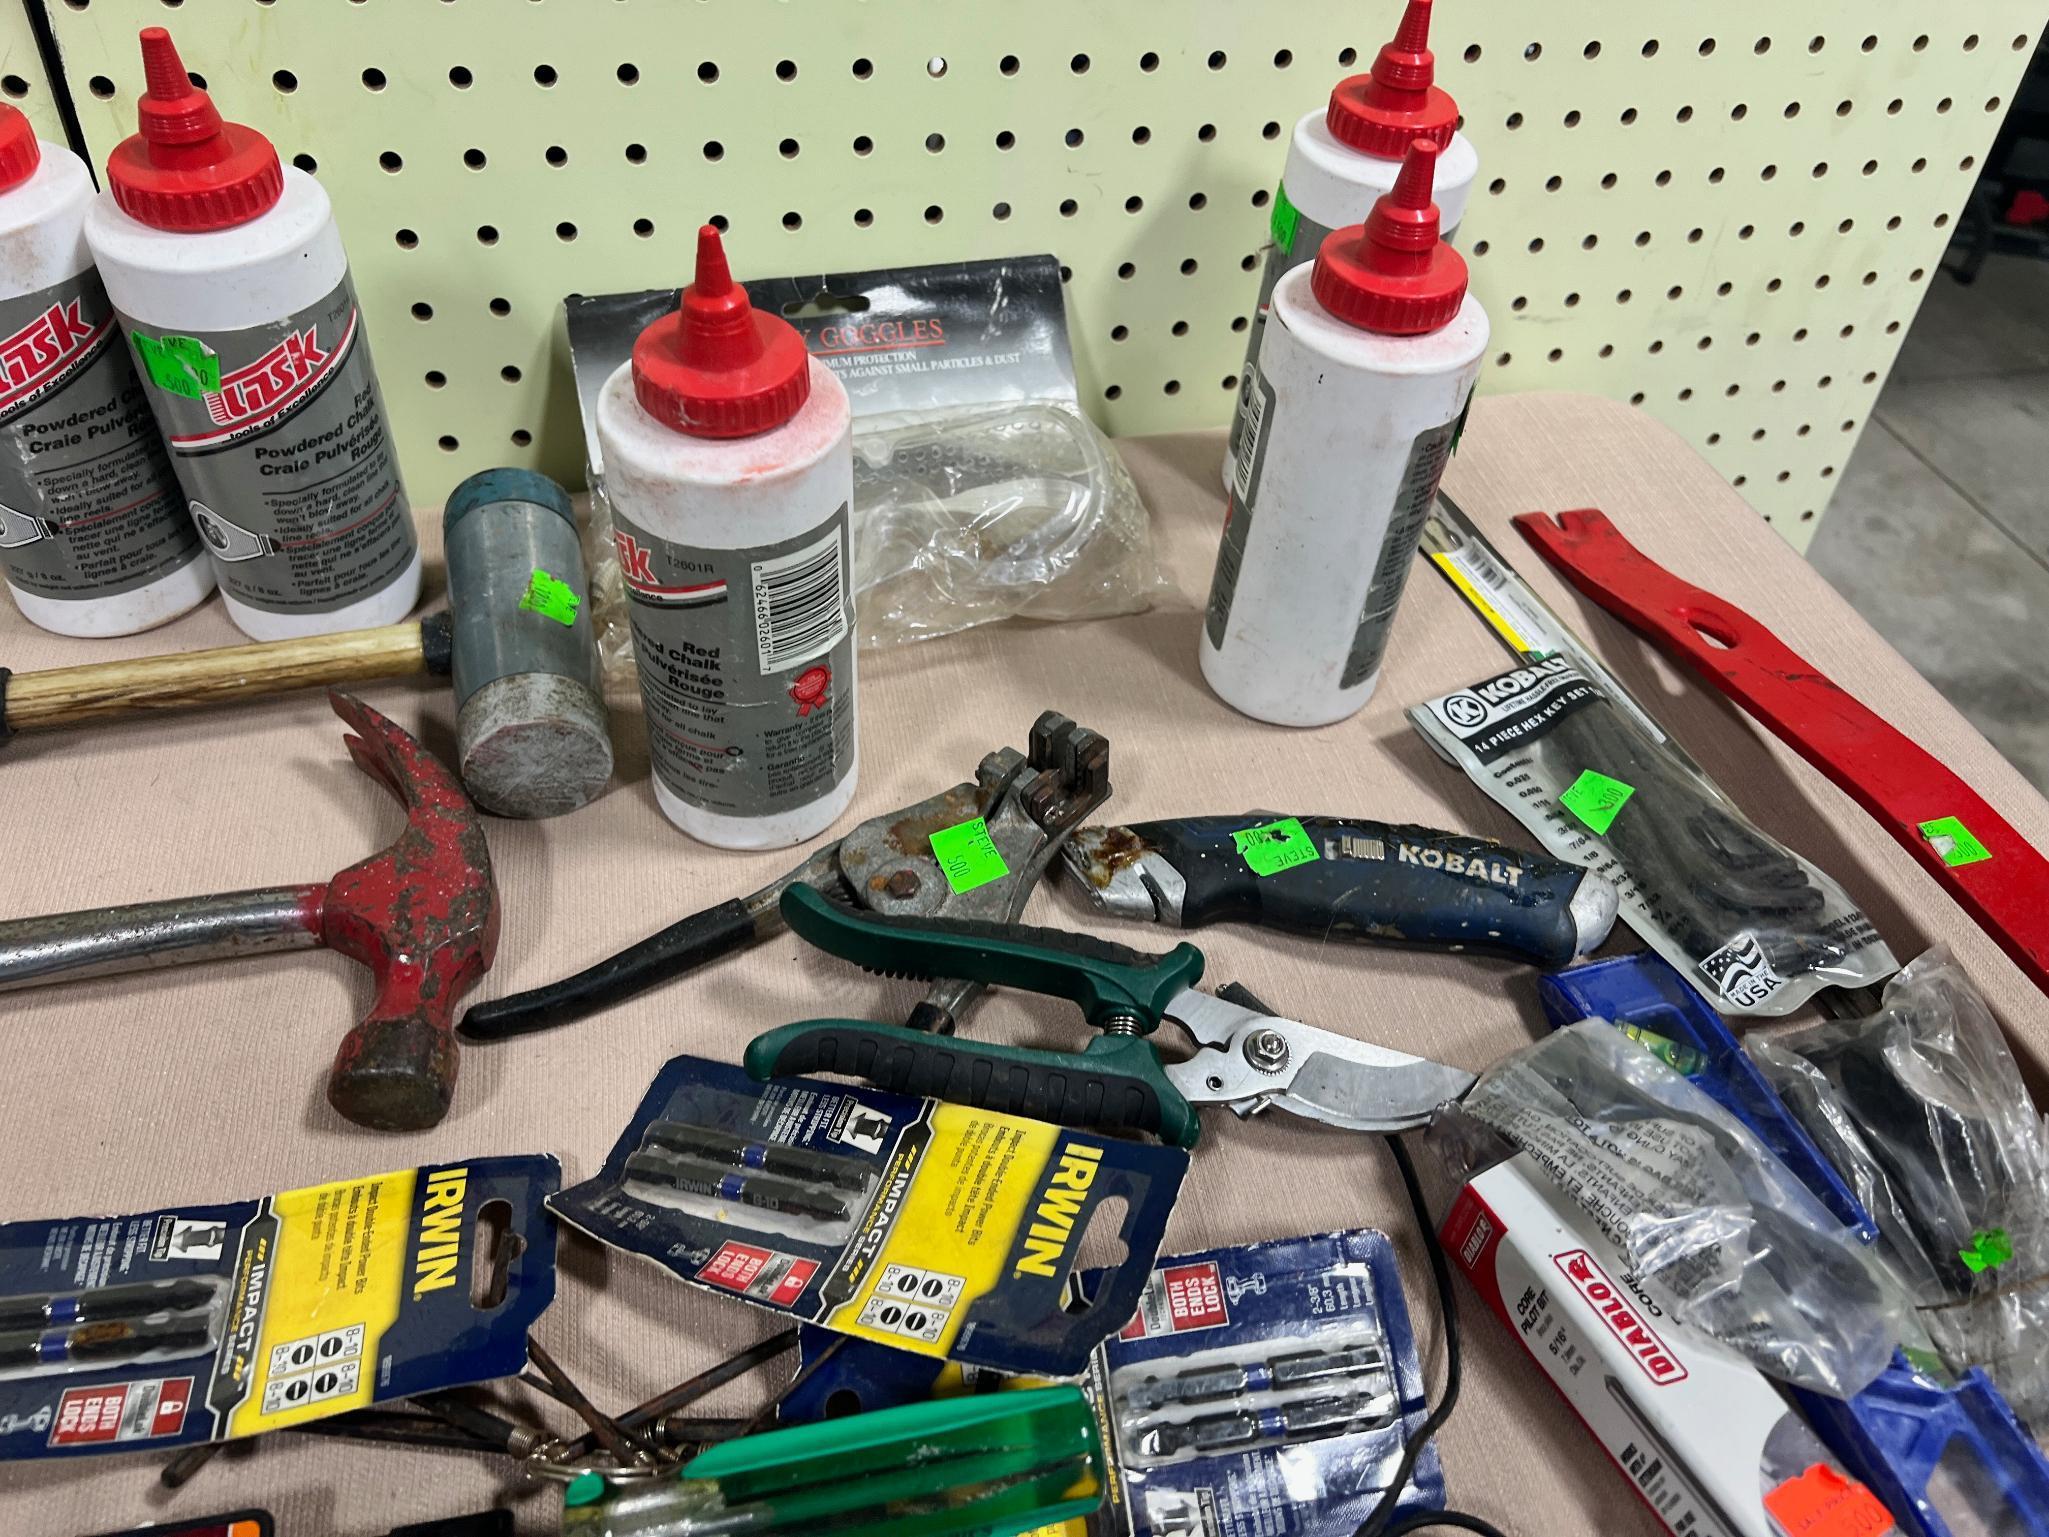 Lot of asst. tools, some unused, Chalk, pry bars, hammers, wrenches and more